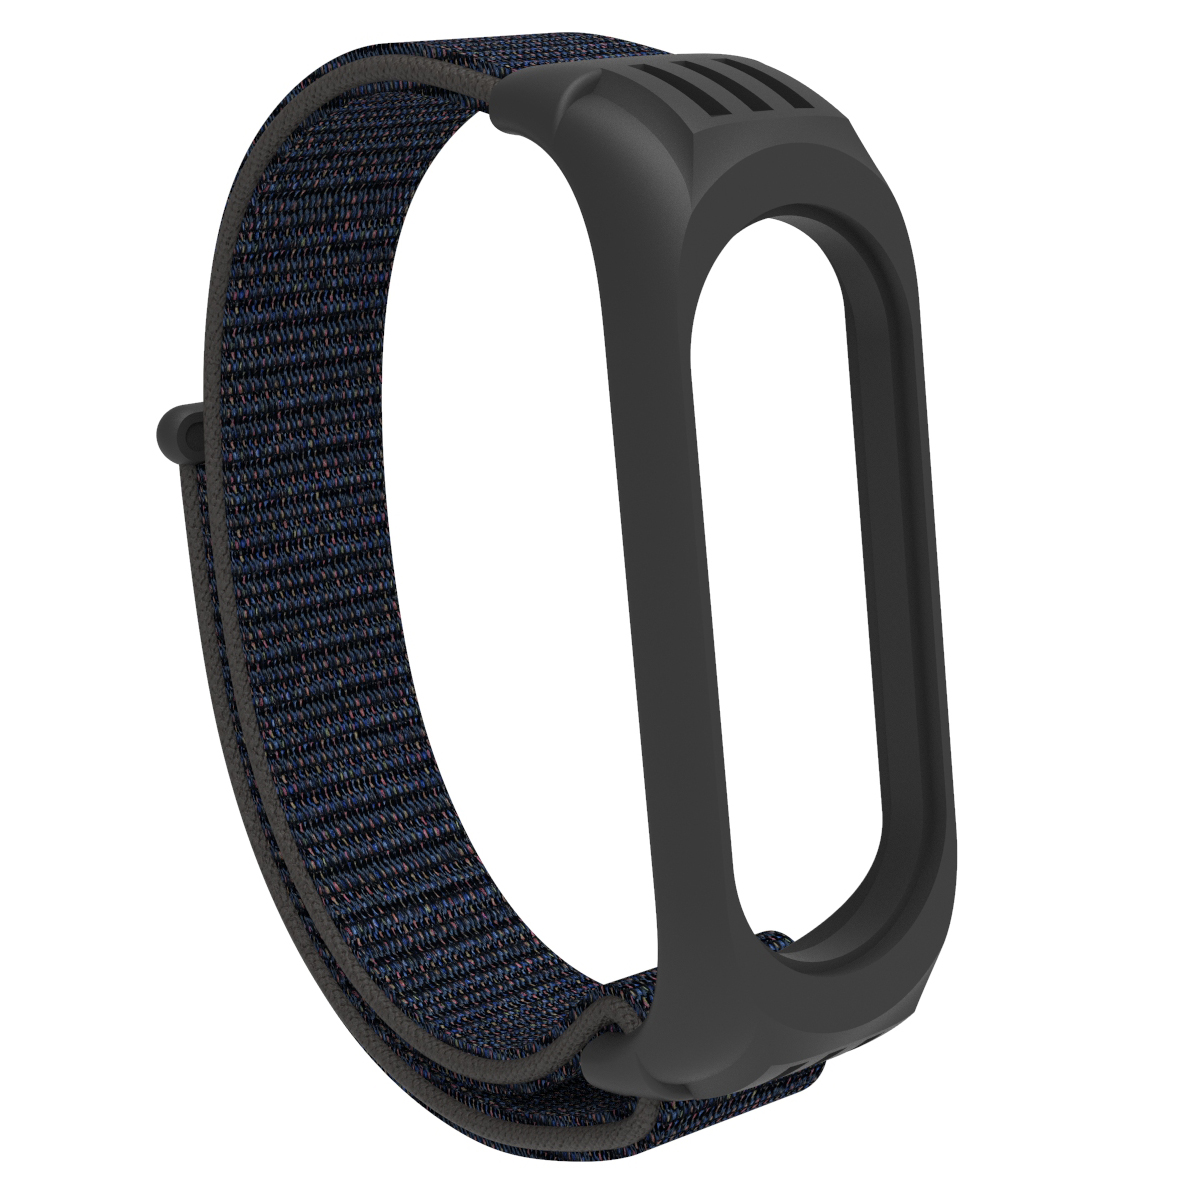 Holdmi-2-IN-1-Comfortable-Nylon-Watch-Strap-Band--TPU-Watch-Case-Cover-Replacement-for-Xiaomi-Mi-Ban-1758522-21